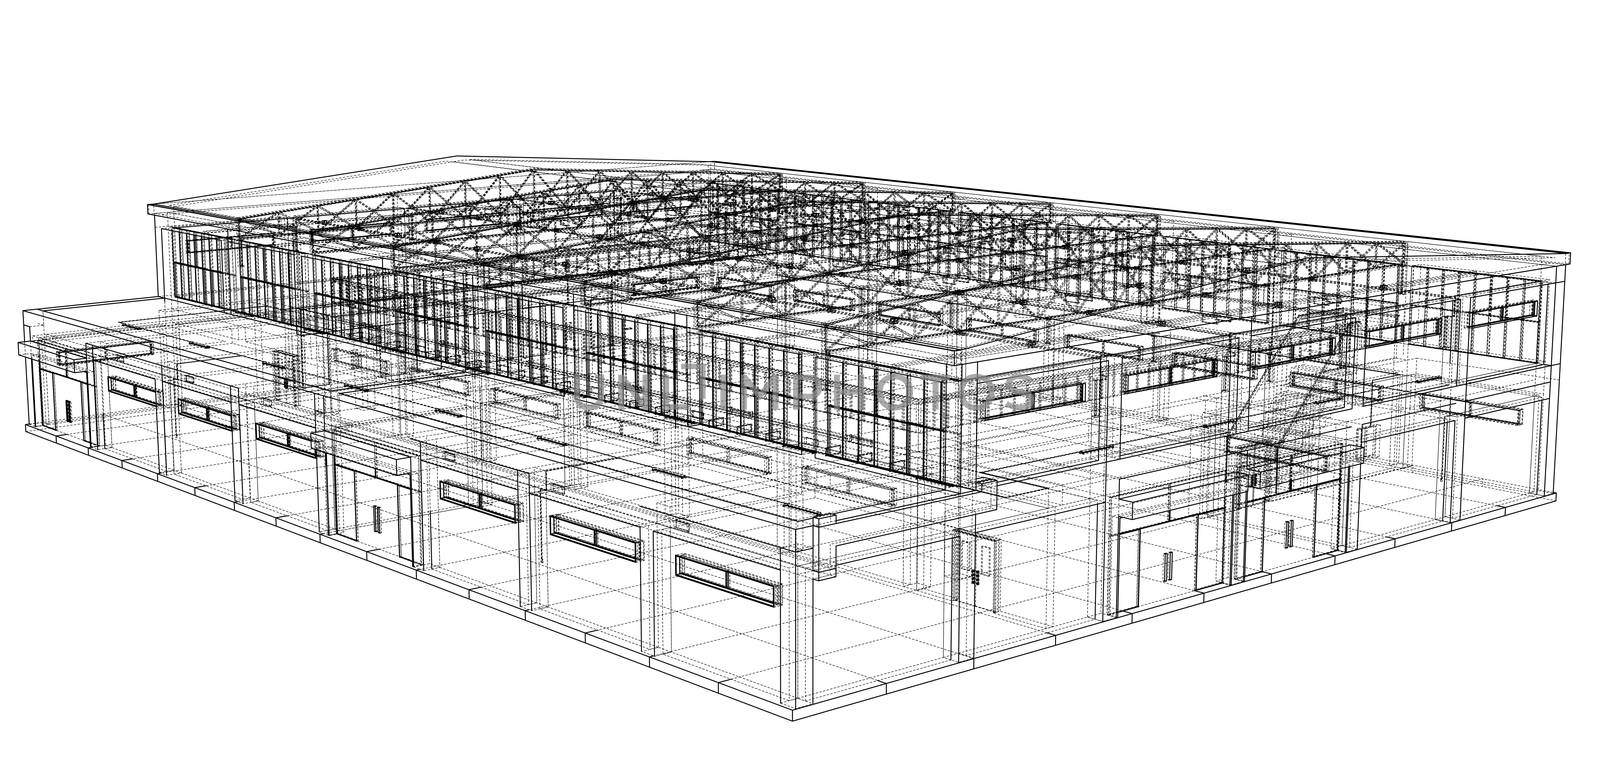 Warehouse sketch. 3d illustration by cherezoff